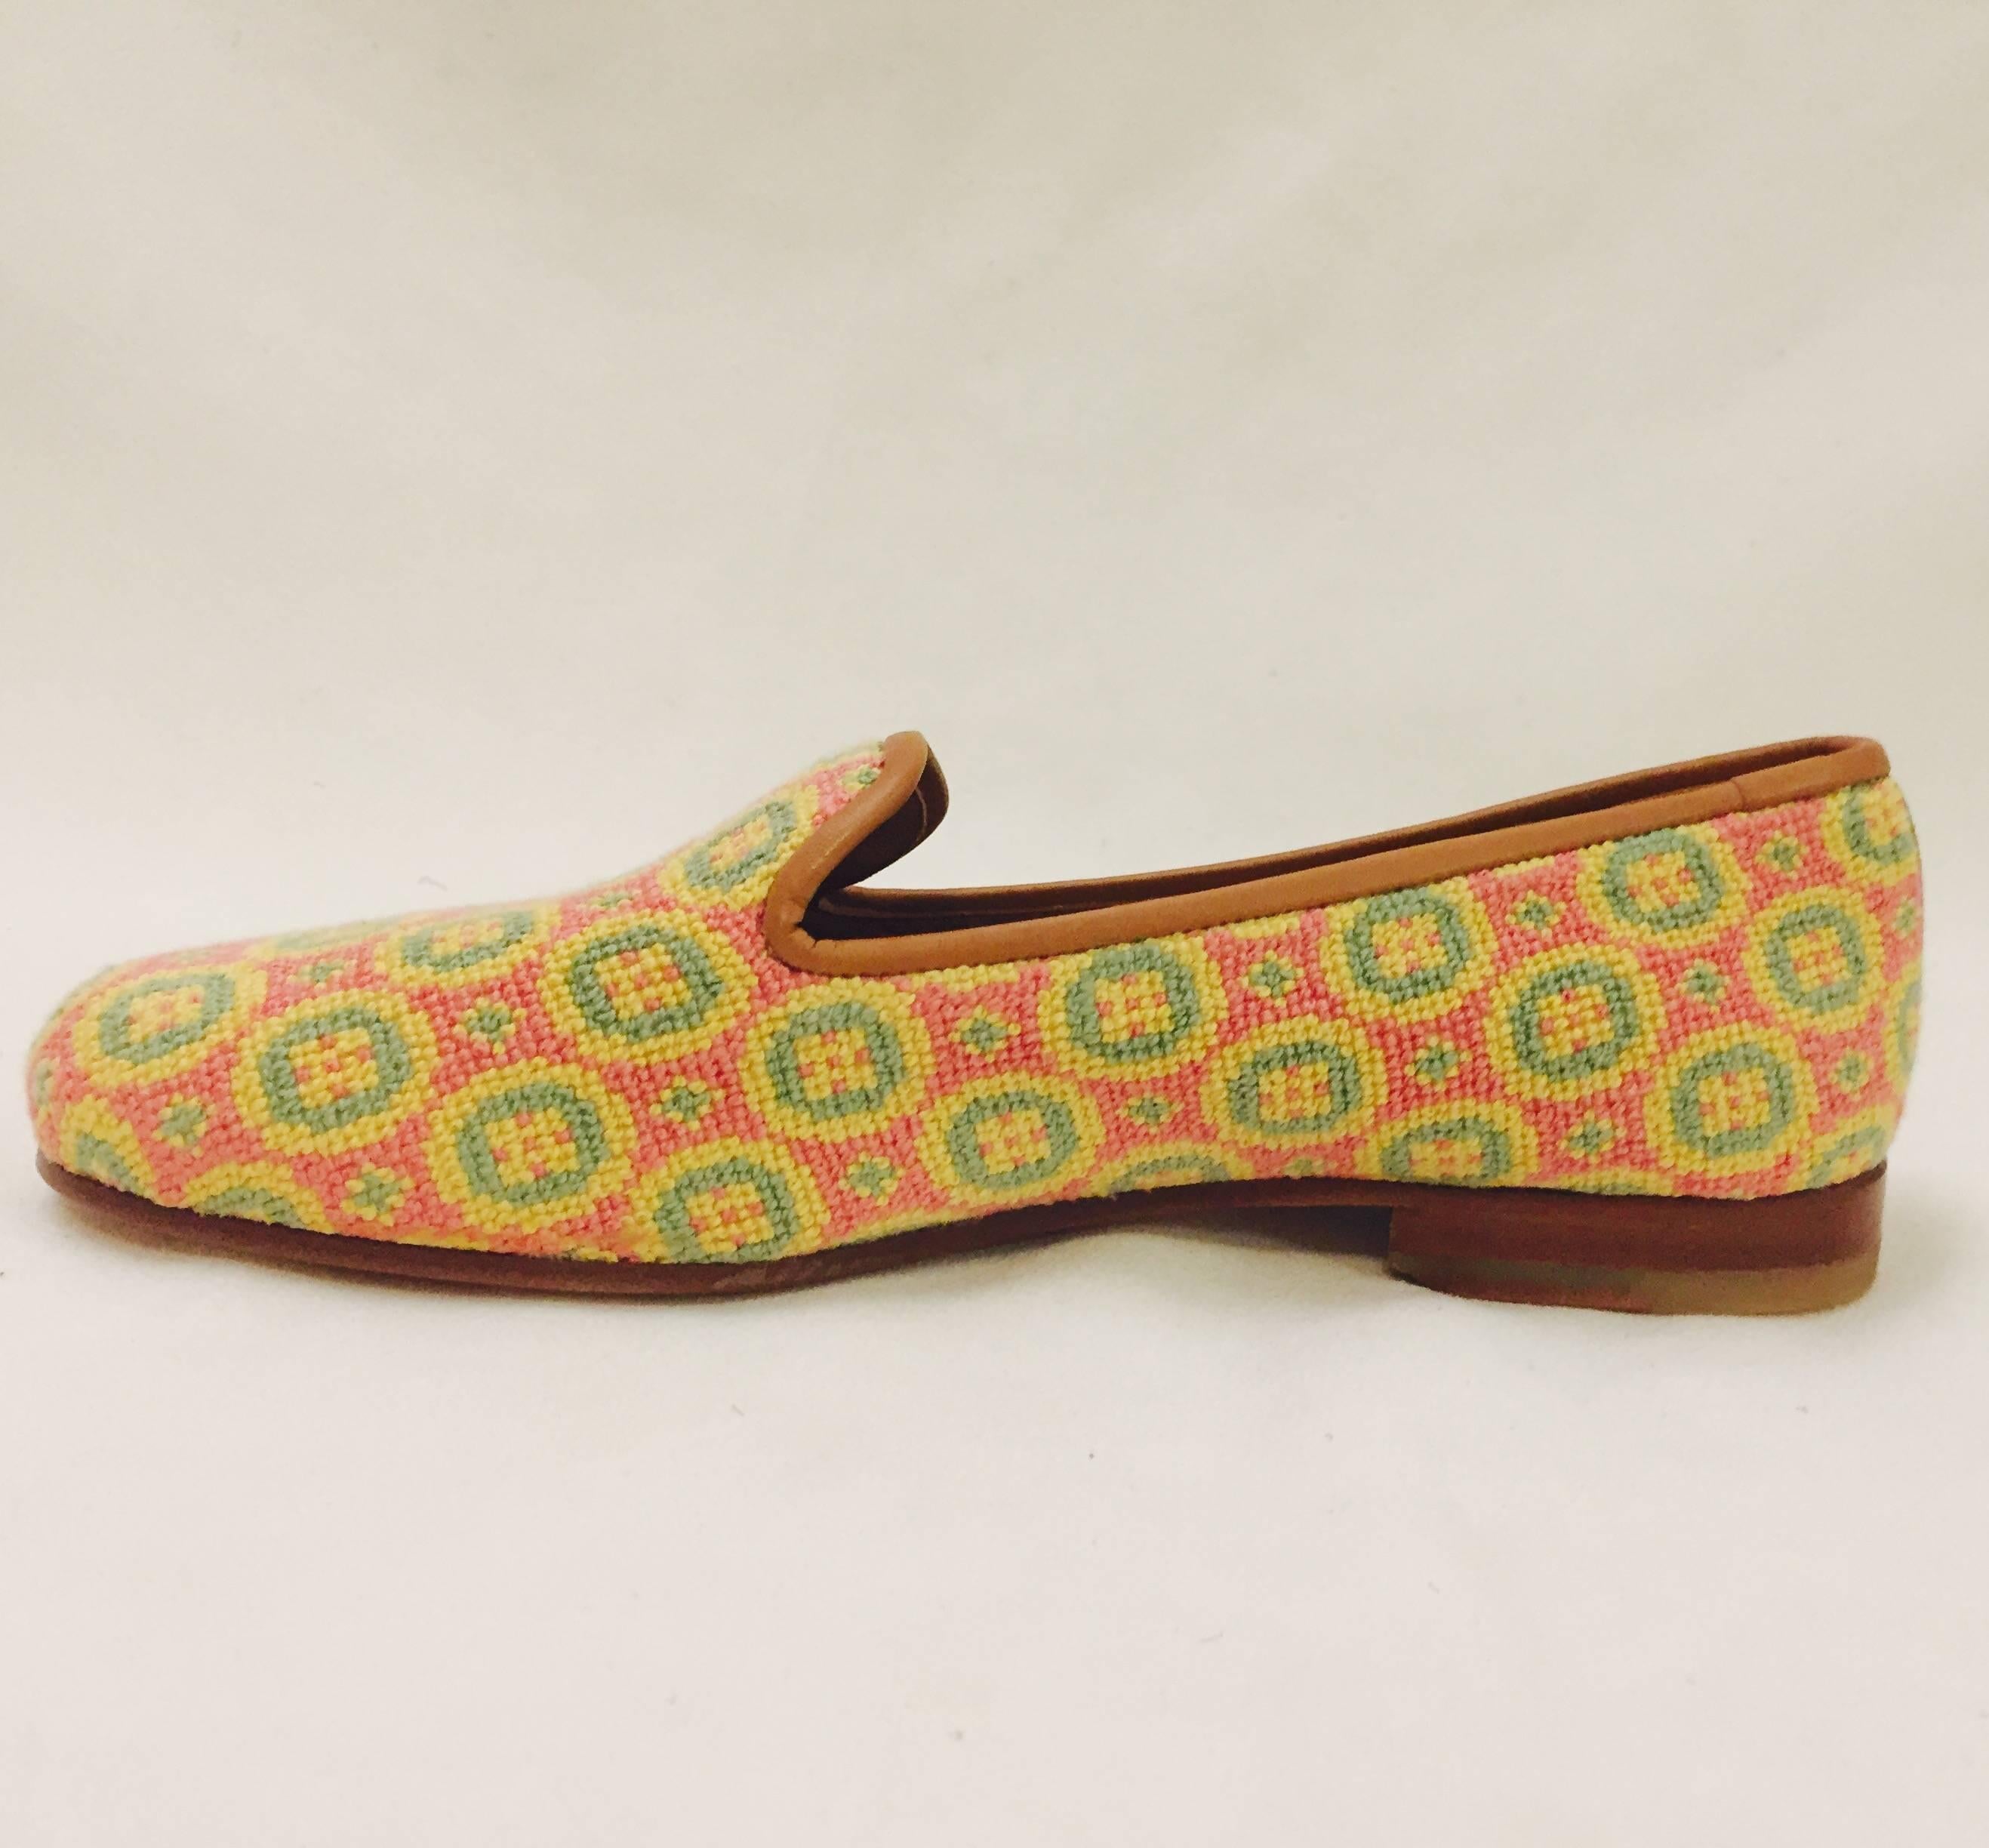 Women's Stubbs & Wootton Sensible Needlepoint Fabric Slippers in Yellow Pink and Green 